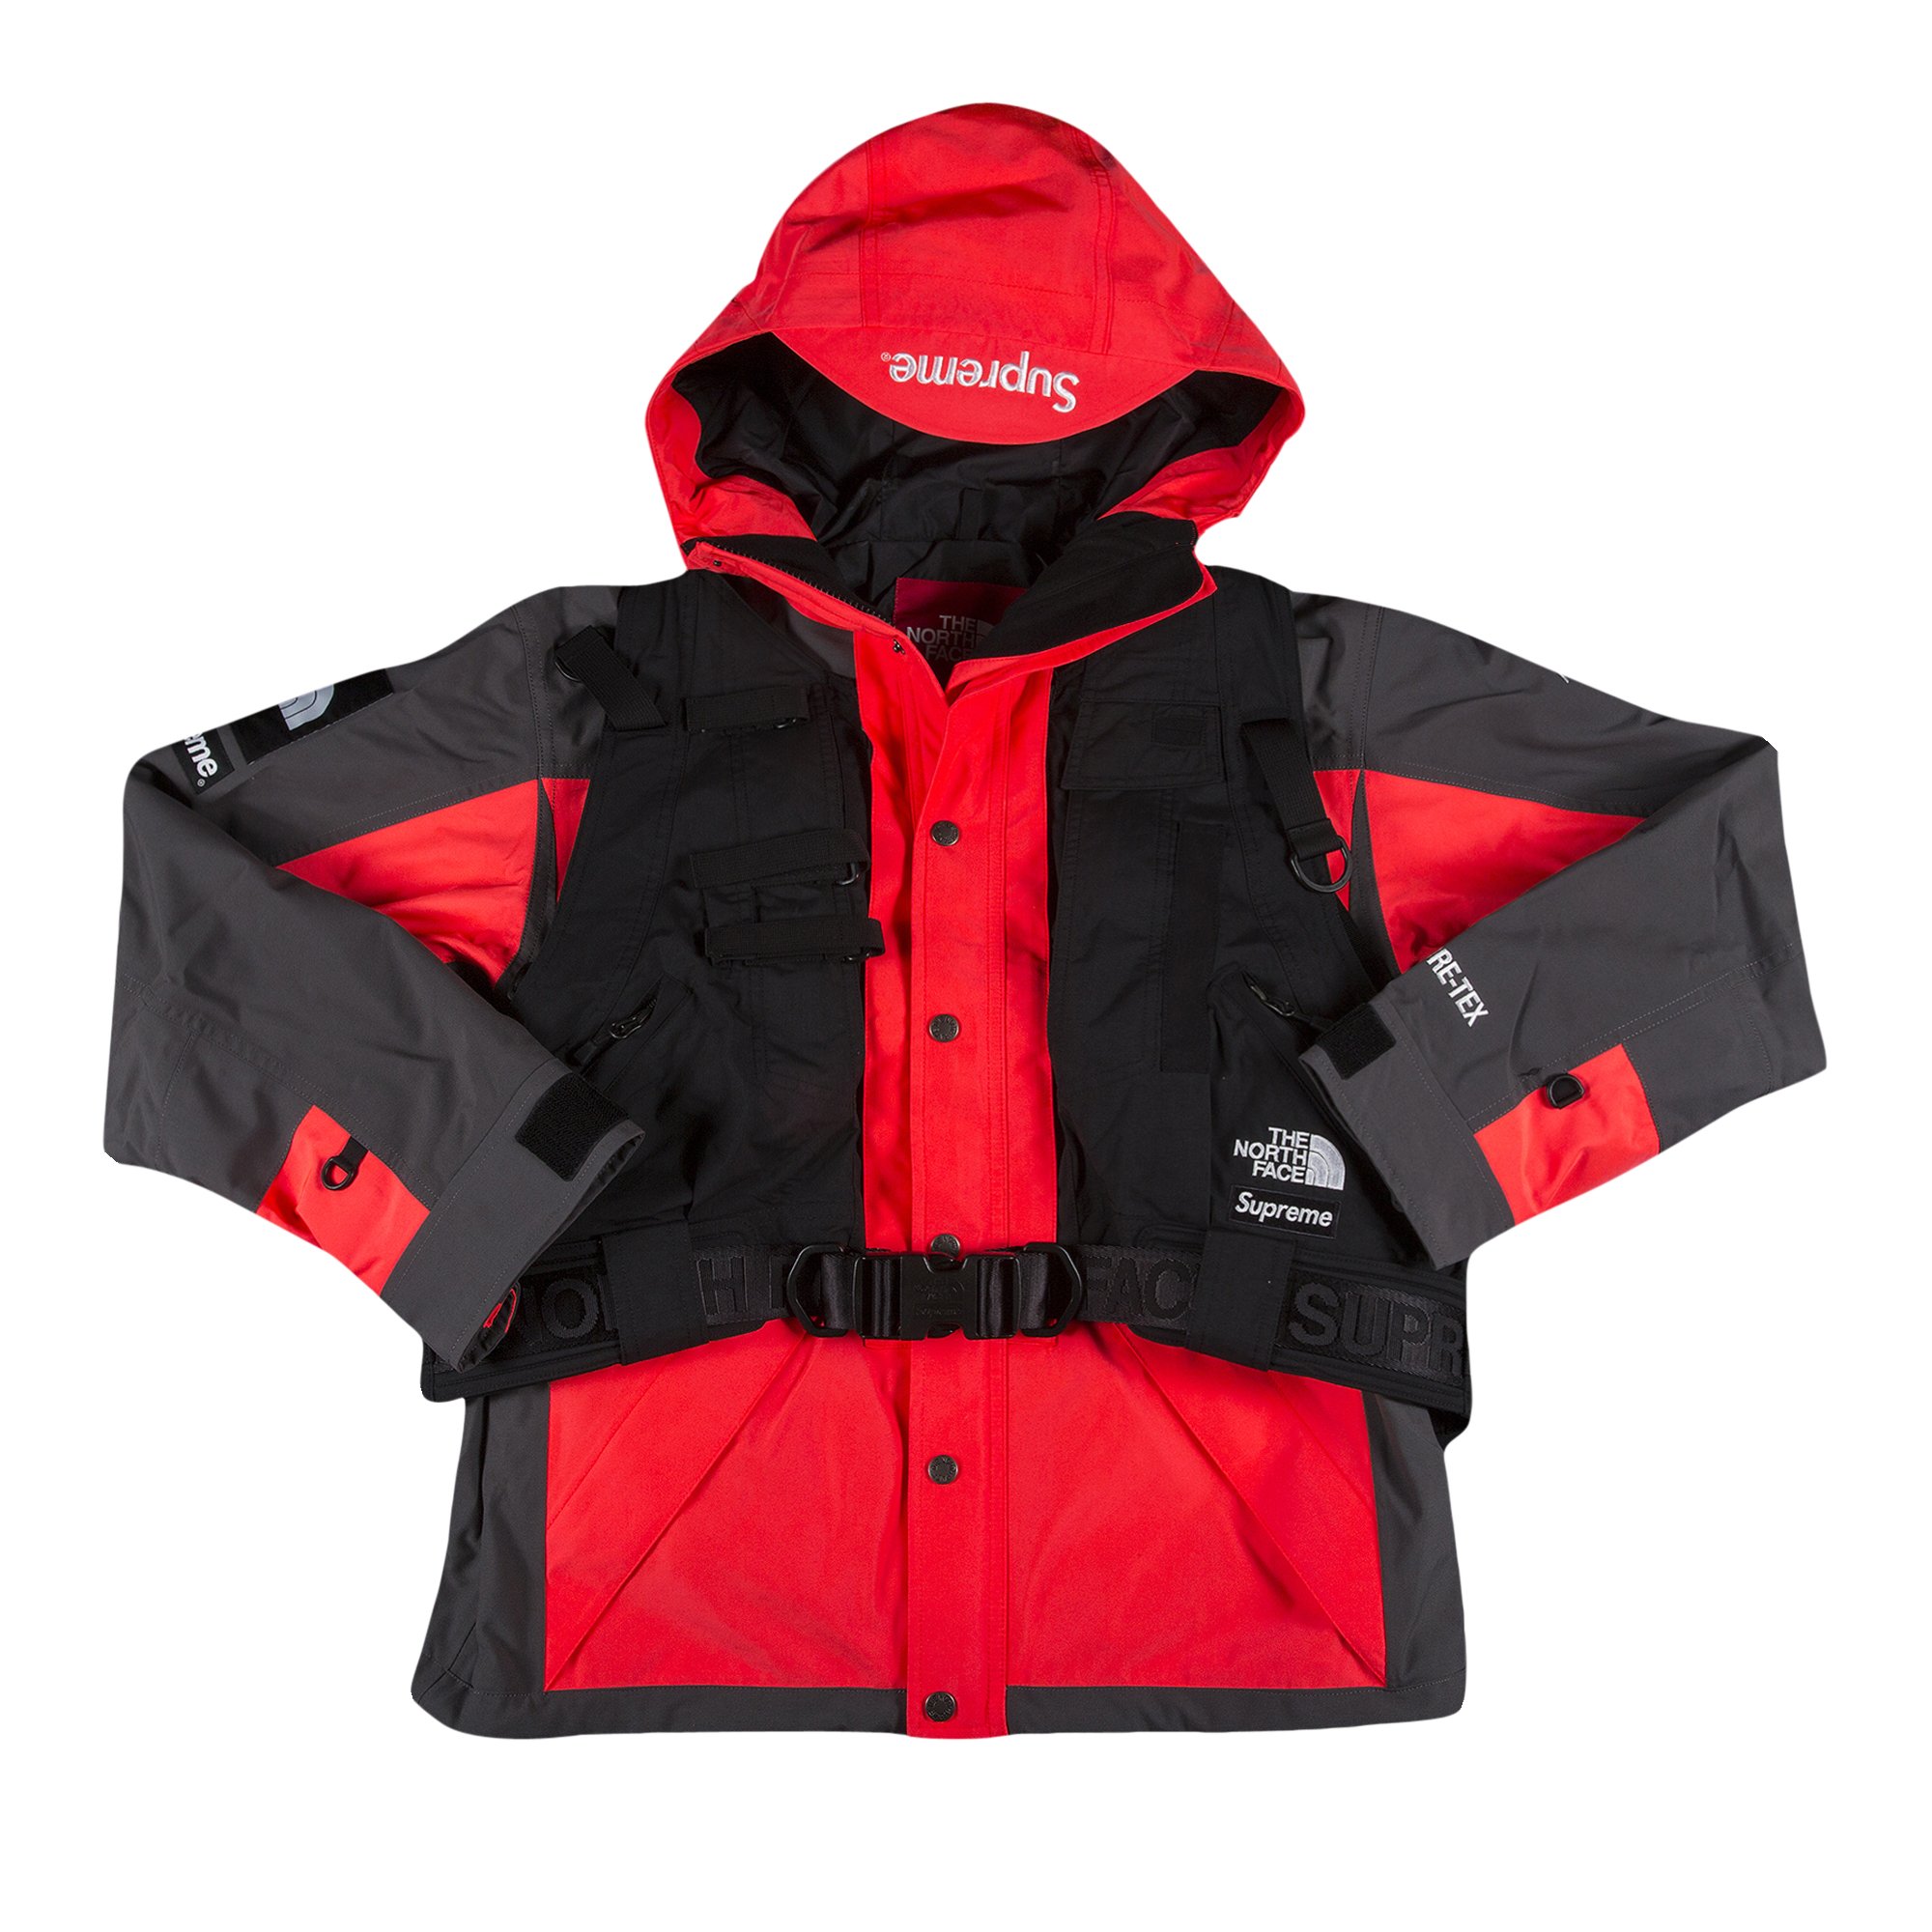 Buy Supreme x The North Face RTG Jacket + Vest 'Bright Red ...